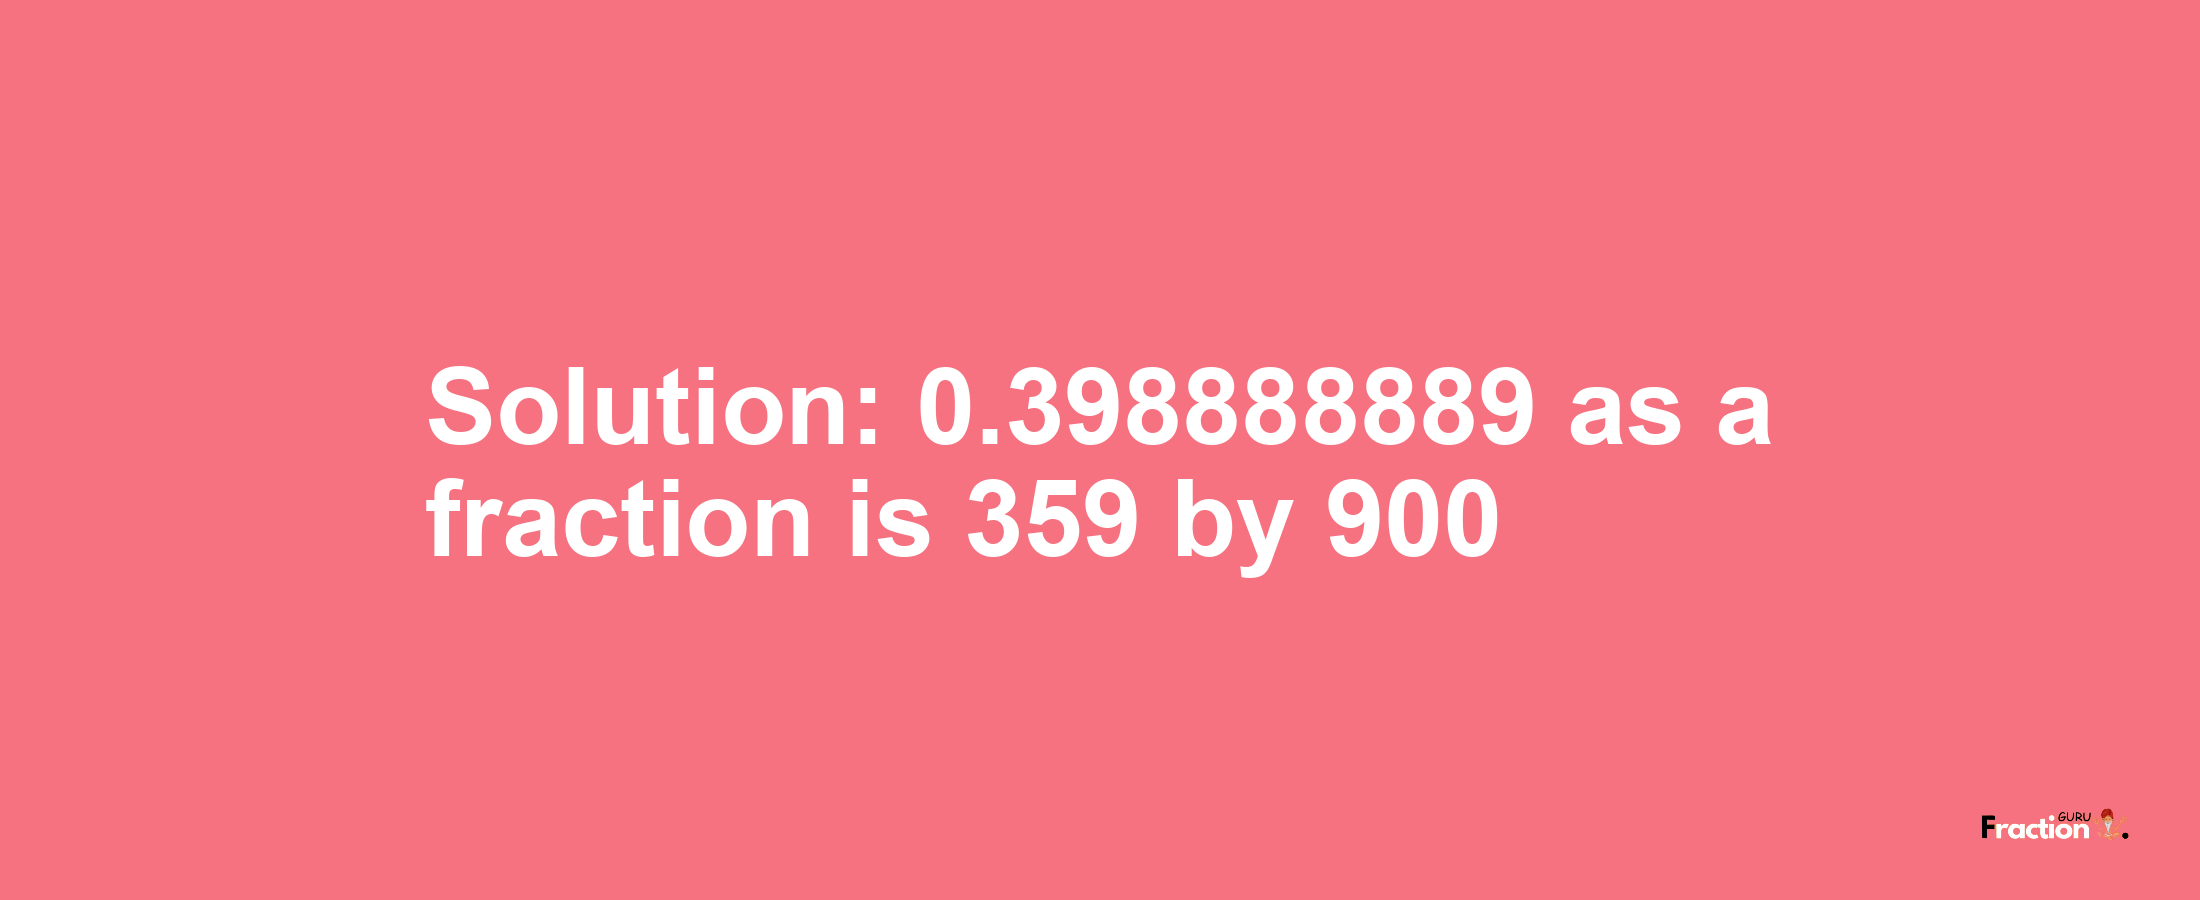 Solution:0.398888889 as a fraction is 359/900